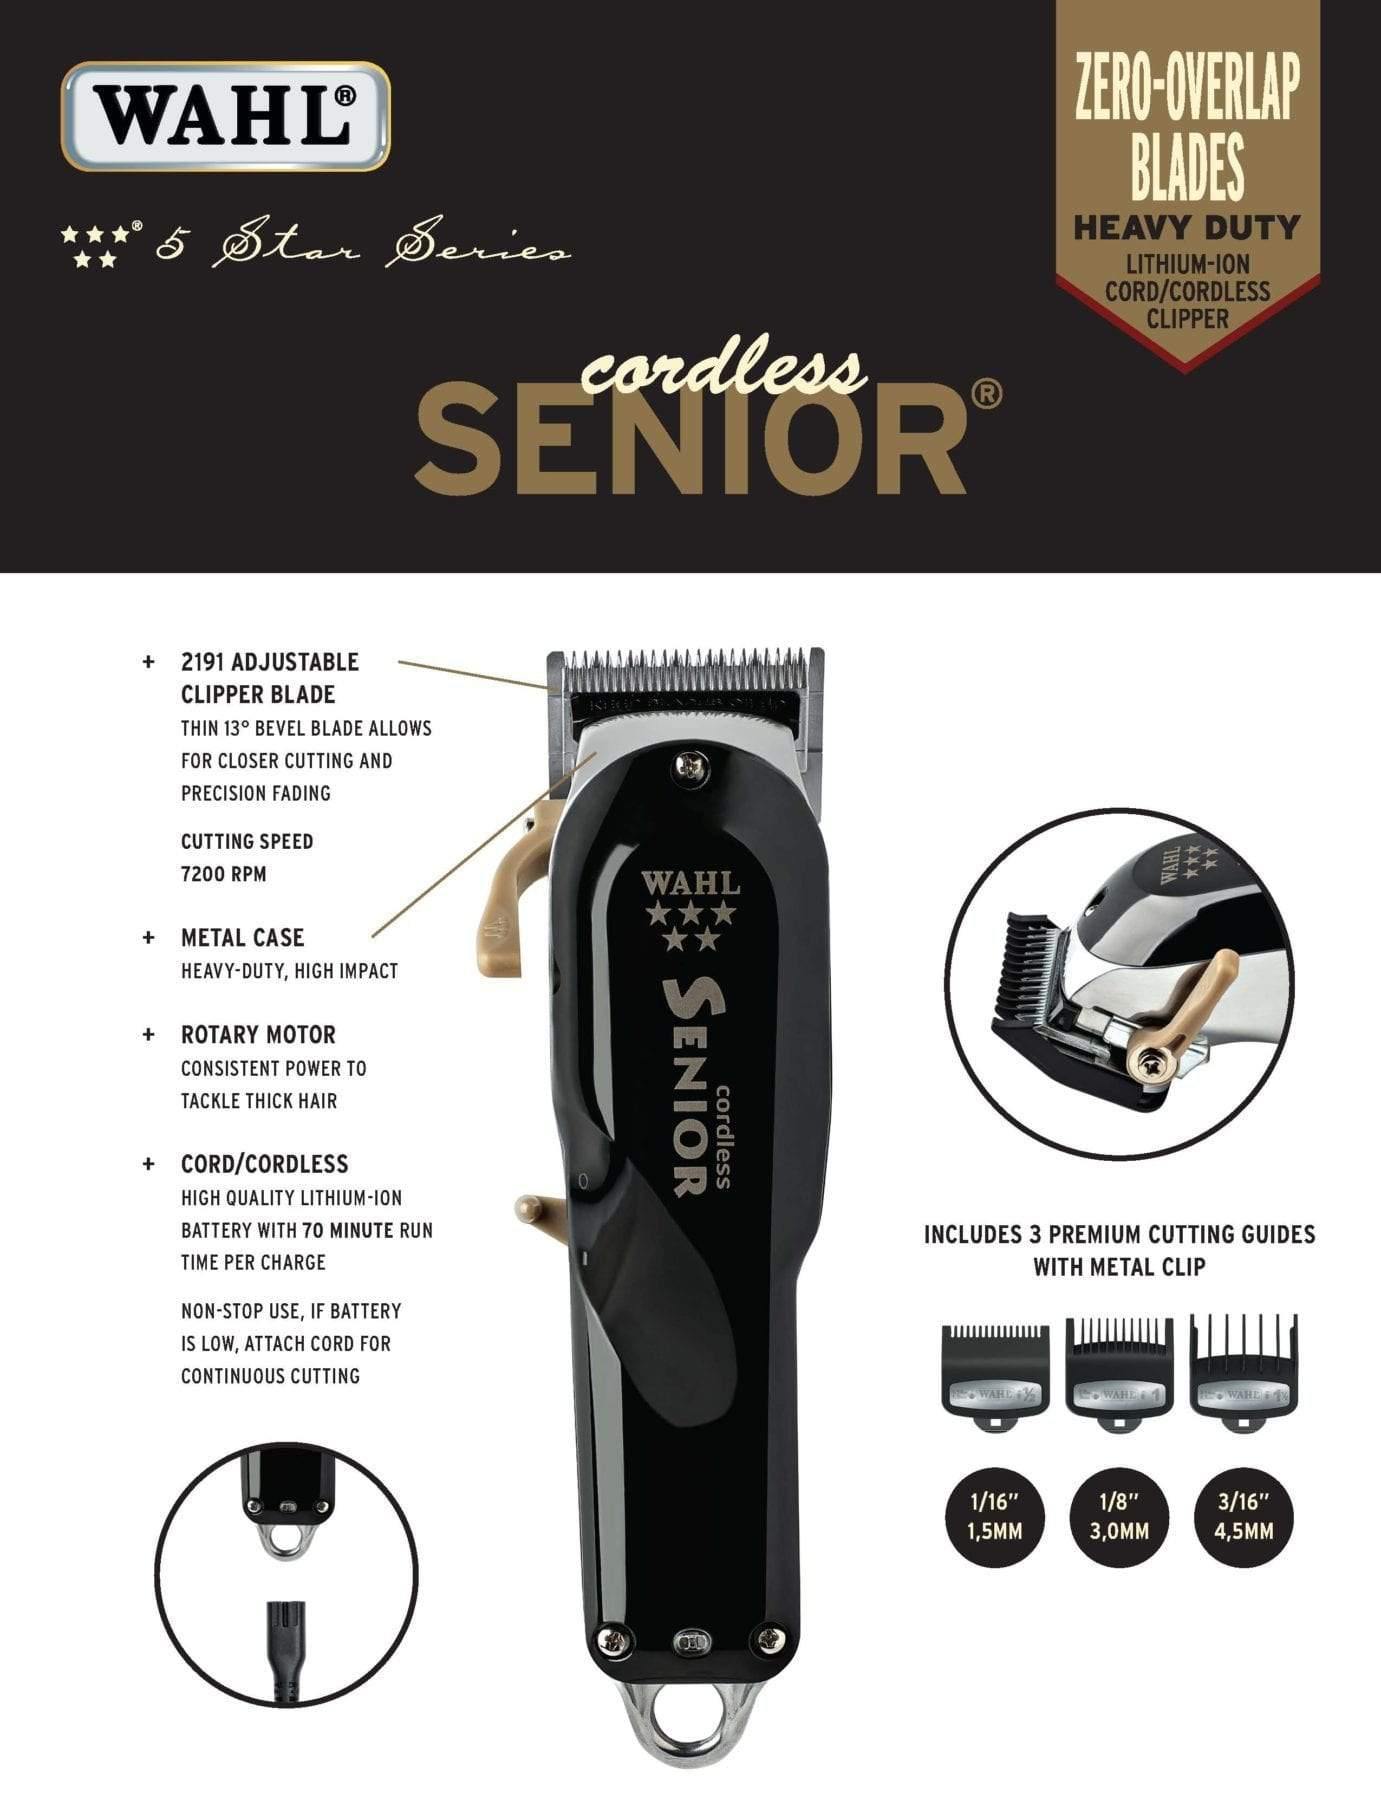 What Are The Differences Between The Cordless Magic Clip, Cordless Legend,  and Cordless Senior??? 